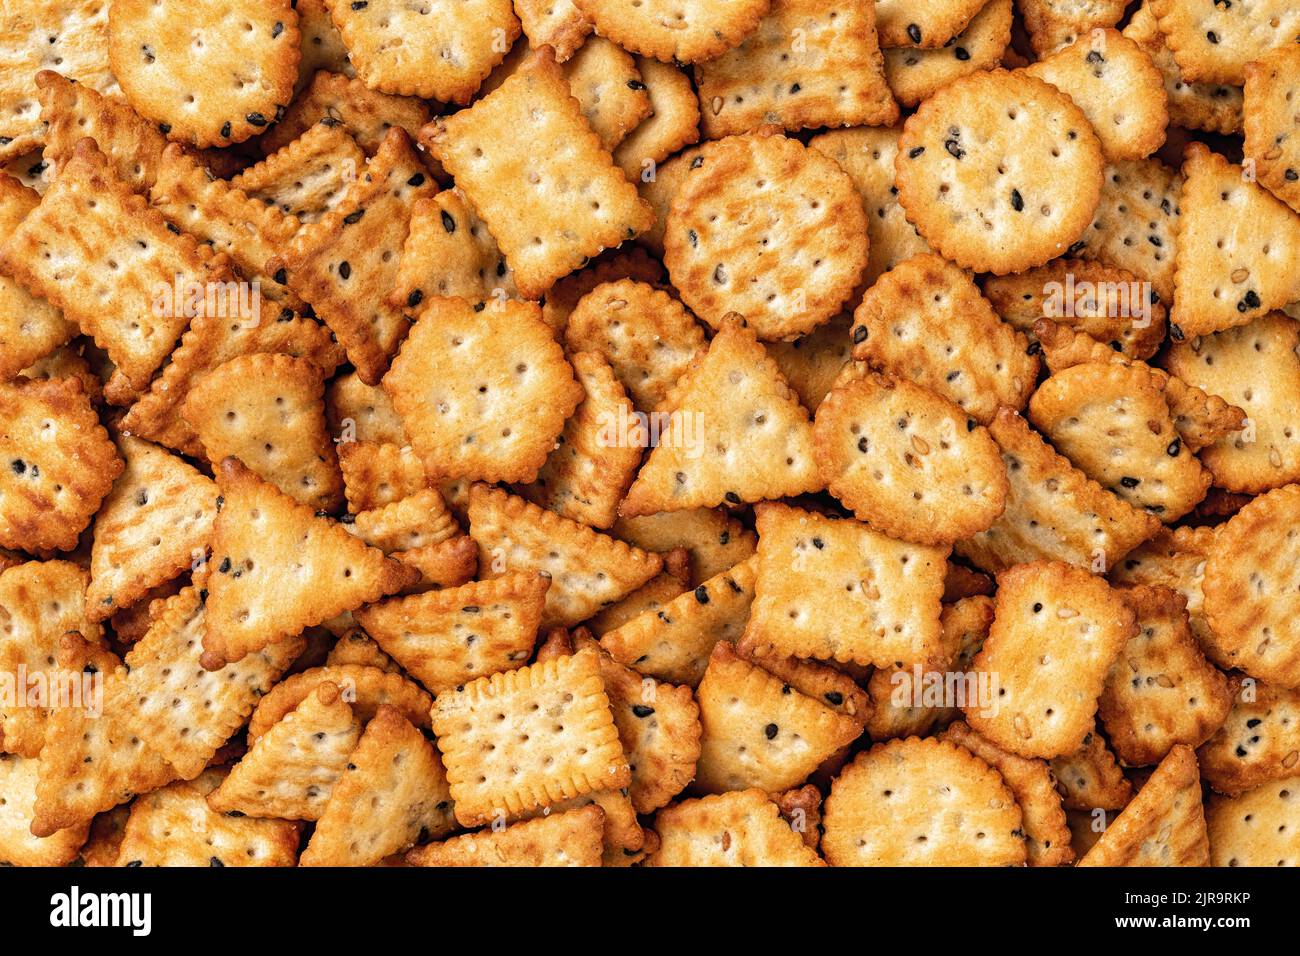 Saltine cracker background. Texture of salty crackers with black and white sesame seeds. Various shaped sesame cookies macro. Ready to eat snack macro Stock Photo